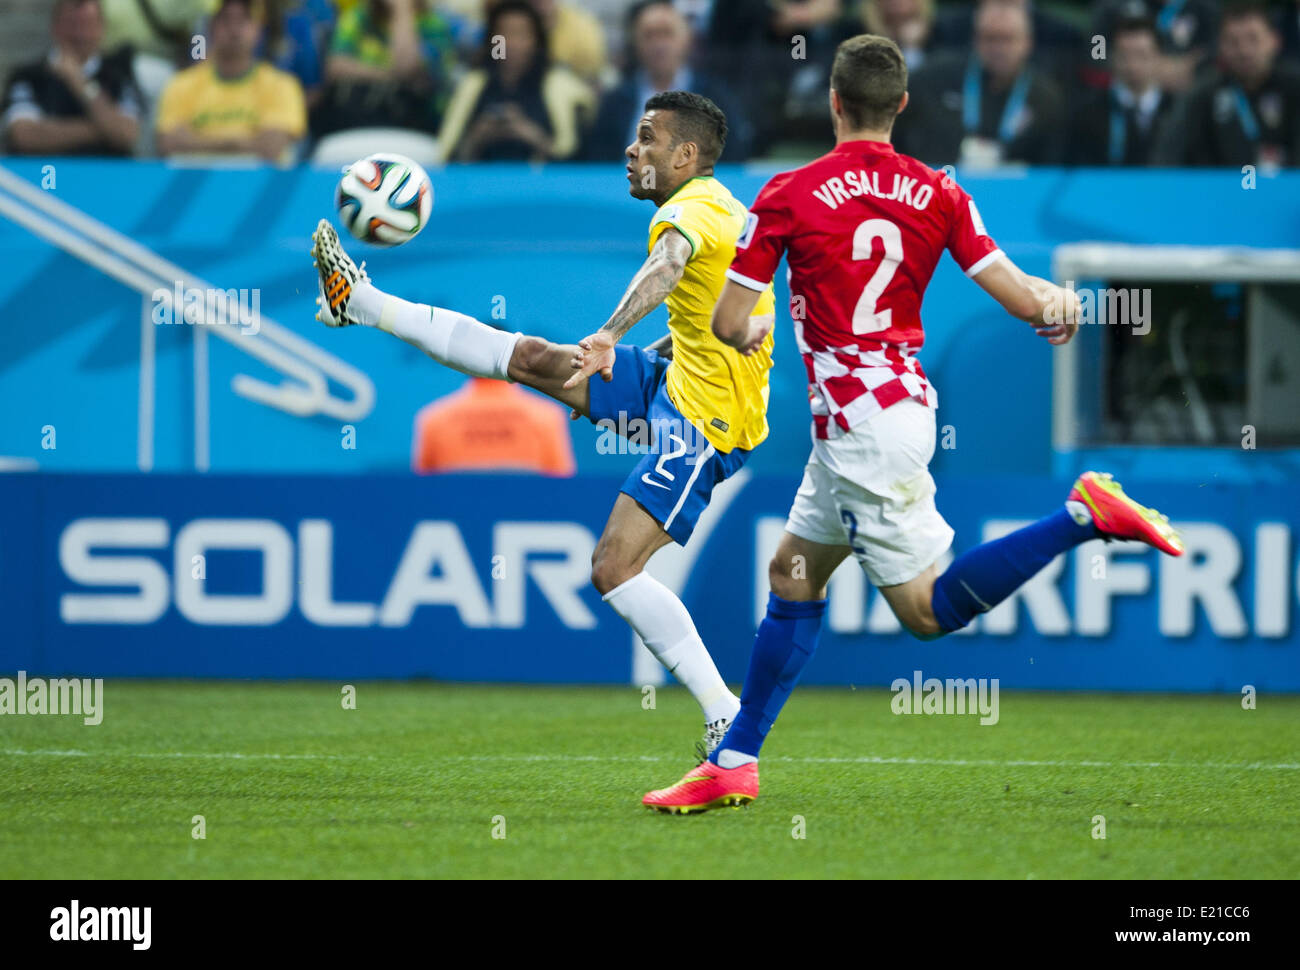 Sao Paulo, Brazil. 12th June, 2014.  Dani Alves and Vrsaljko in the match between Brazil and Croatia in the group stage of the 2014 World Cup, for the group A match at the Arena stadium in Sao Paulo on June 12, 2014 Photo:. Urbanandsport/Nurphoto Credit:  Urbanandsport/NurPhoto/ZUMAPRESS.com/Alamy Live News Stock Photo